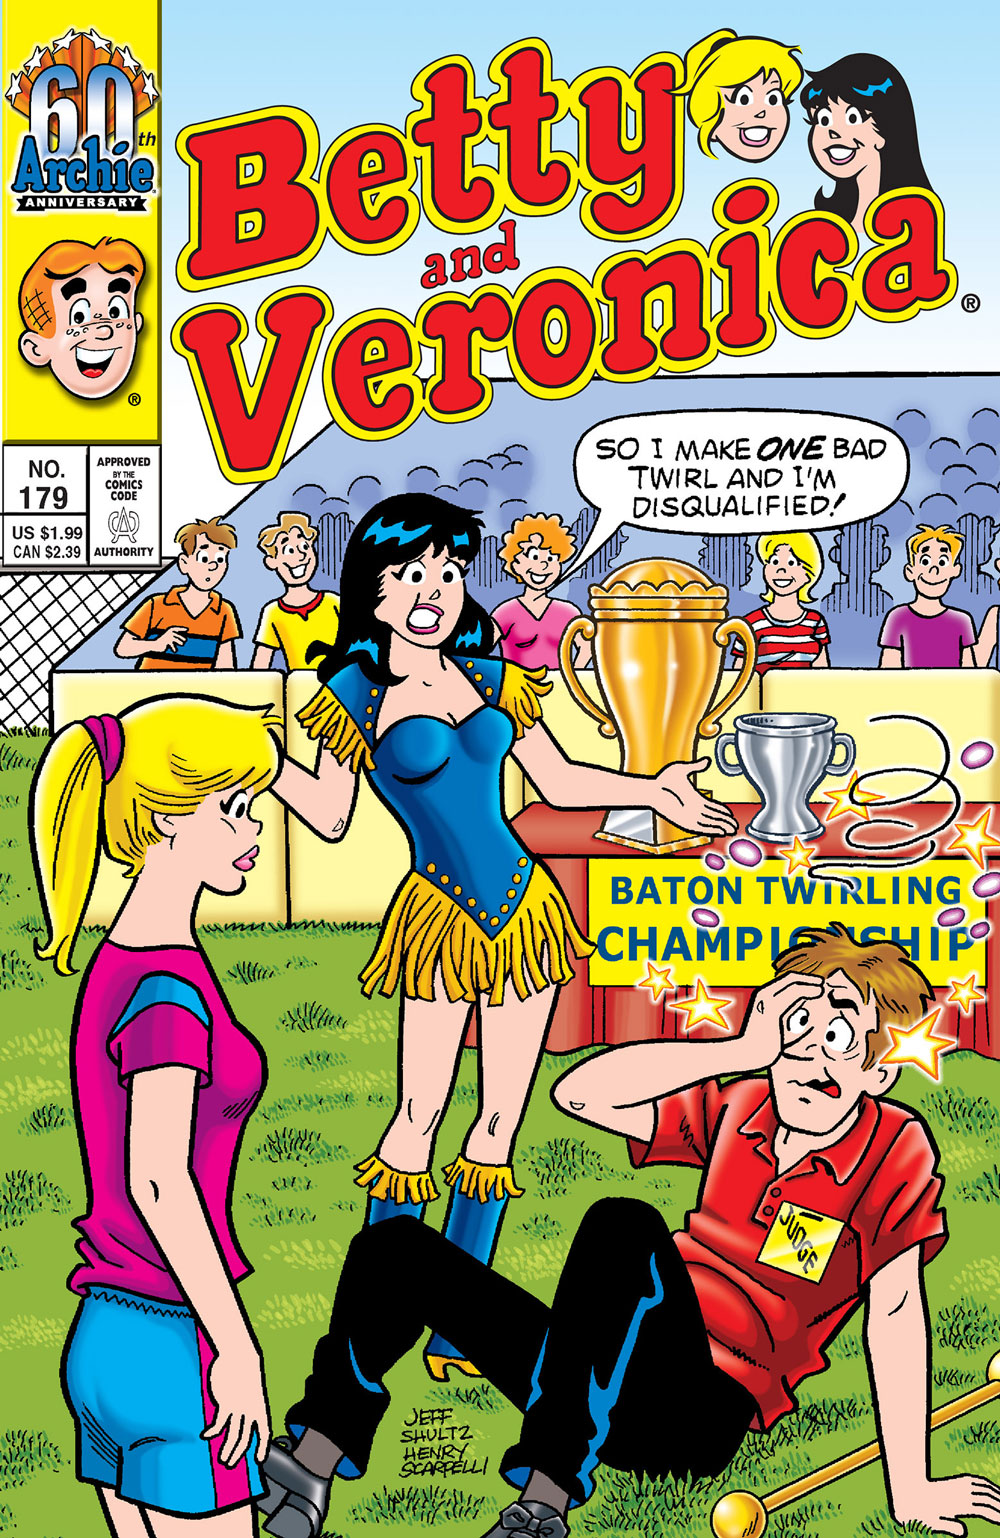 Veronica and Betty are trying out for a baton twirling championship at Riverdale High's football field. She has knocked out a judge, a white male with brown hair laying on the ground holding his face in pain, with stars swirling around his head. She says she made one bad twirl and now she's disqualified. 